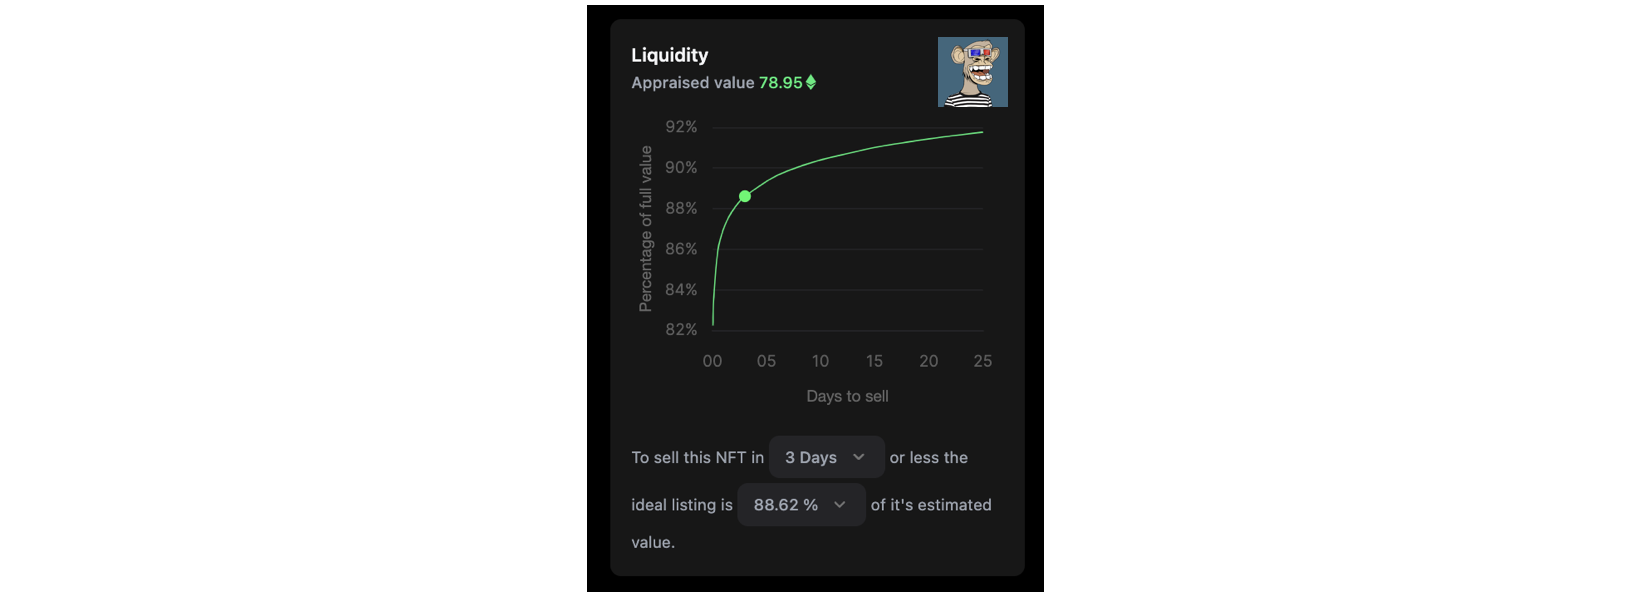 To sell this NFT in 3 days or less, you should list it at 88.62% of its estimated value.